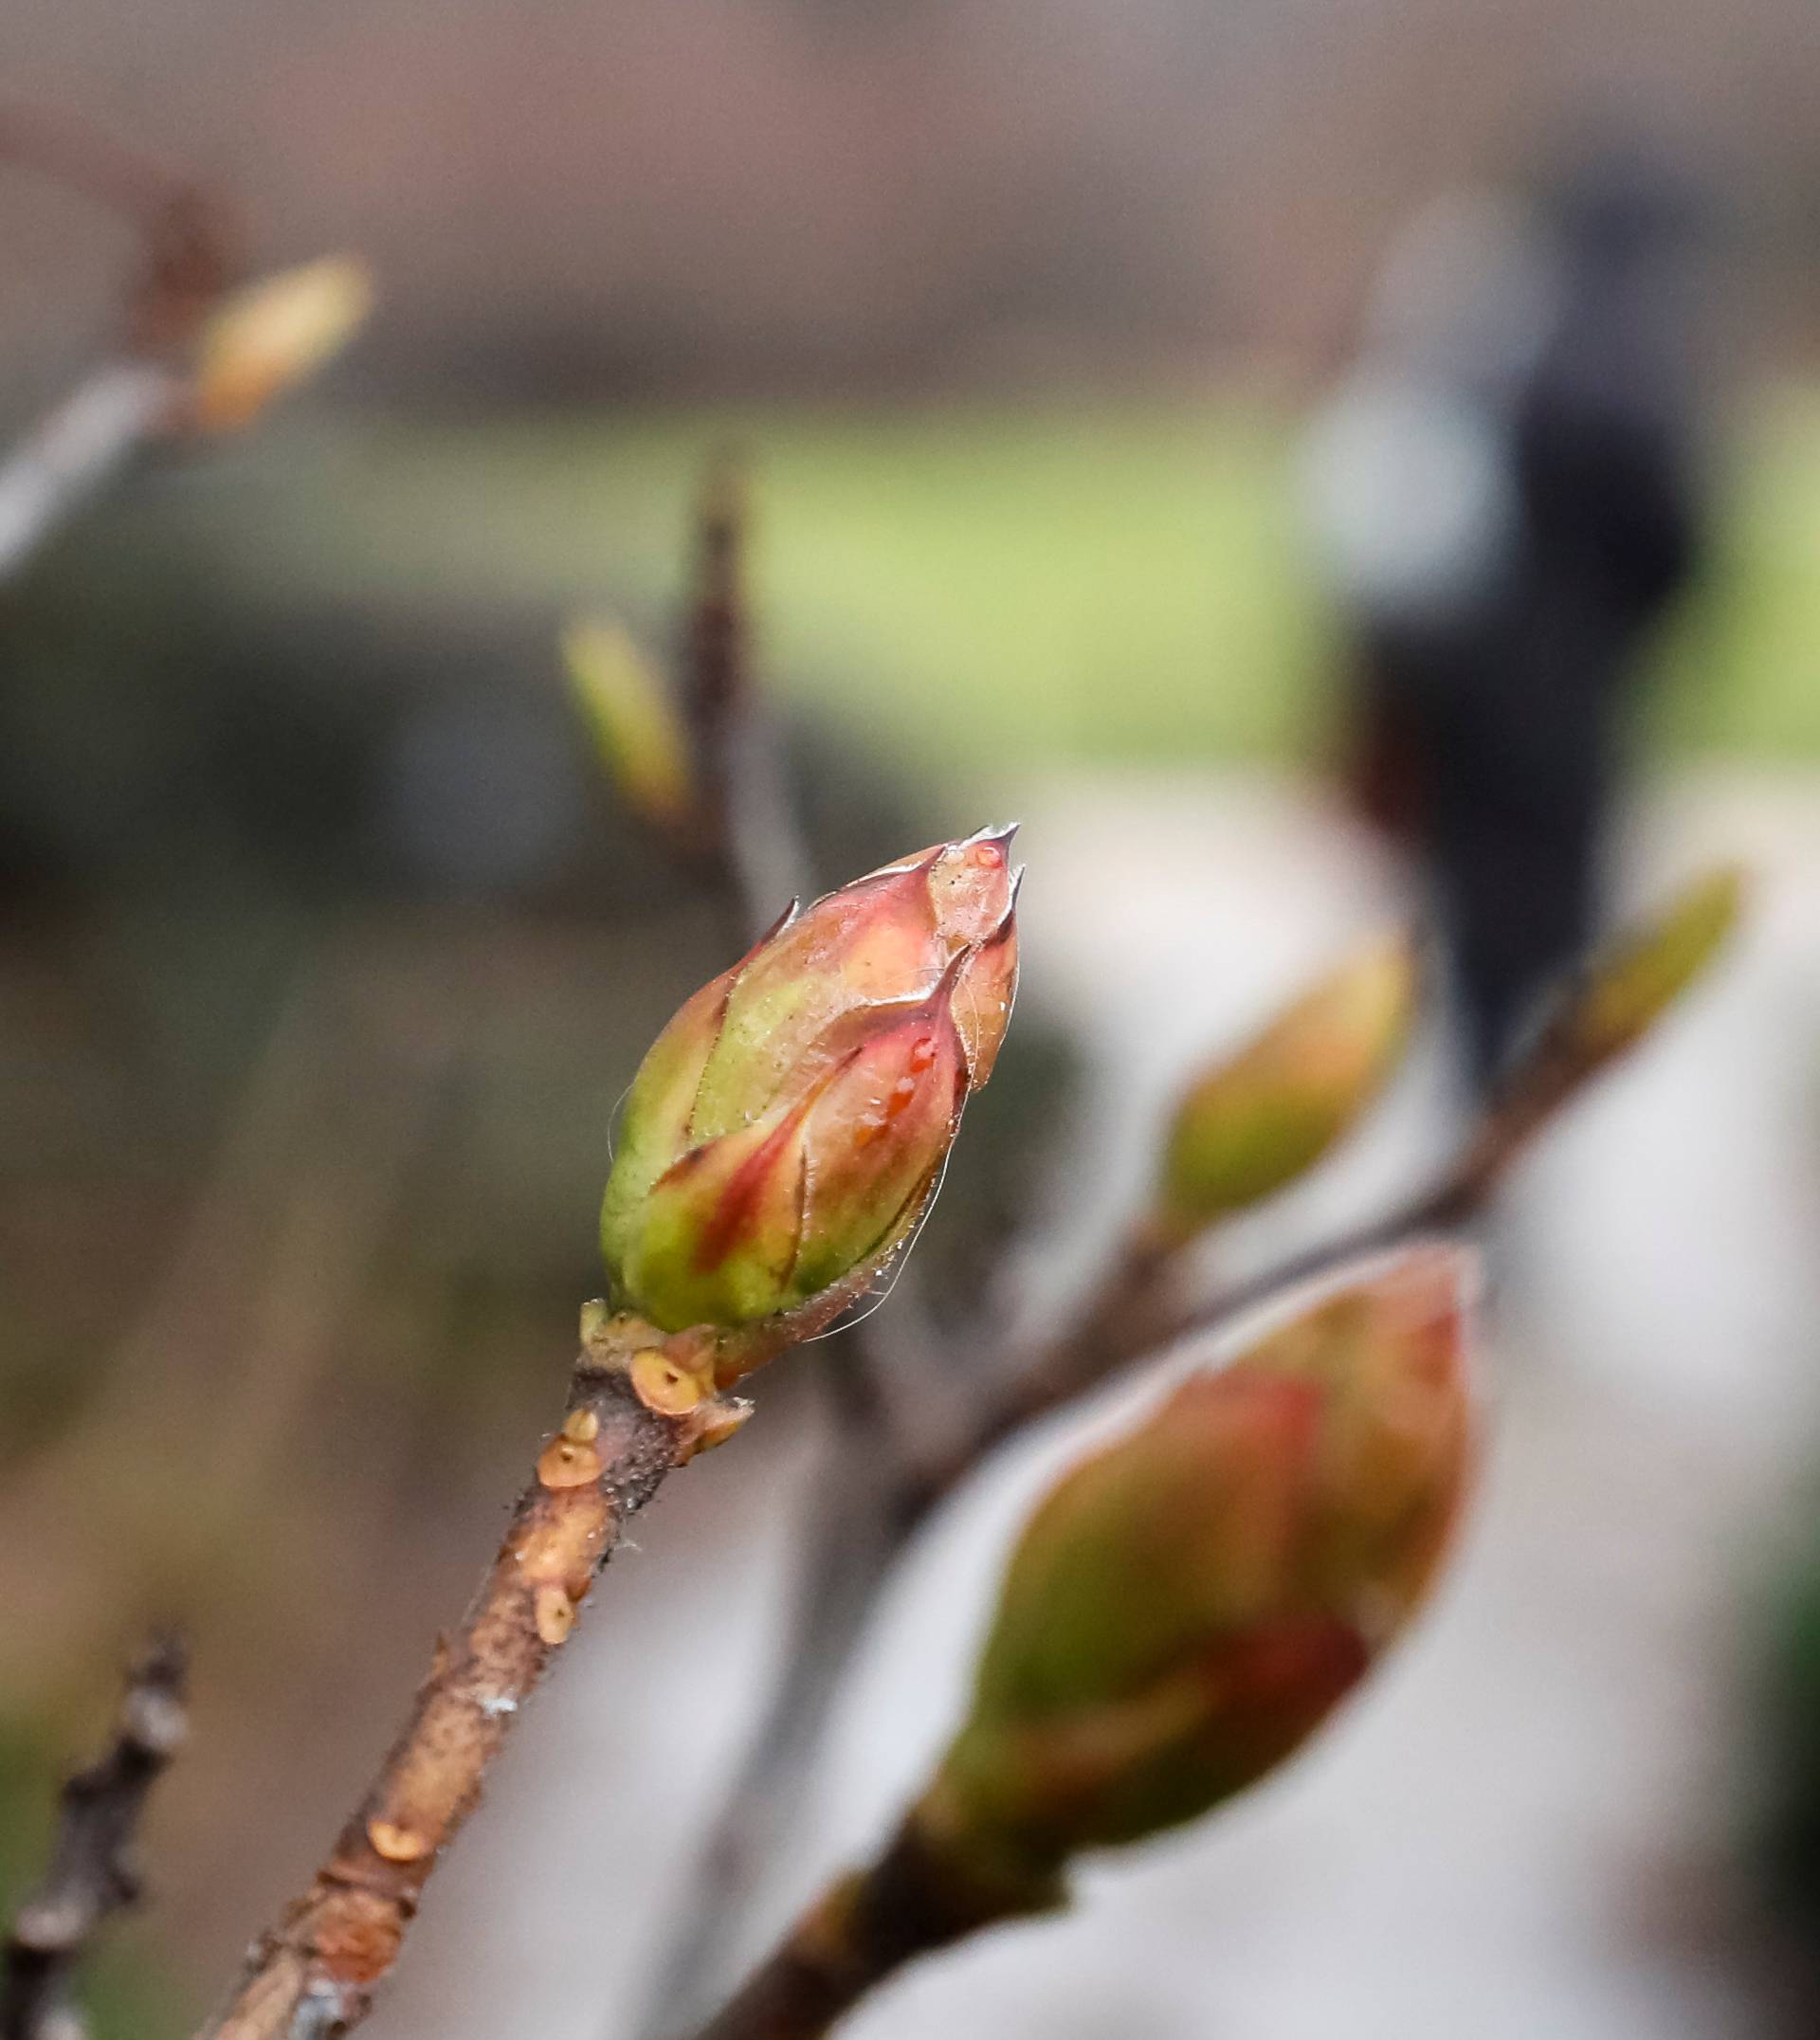 A view shows tree buds in the Apothecary Garden in Moscow